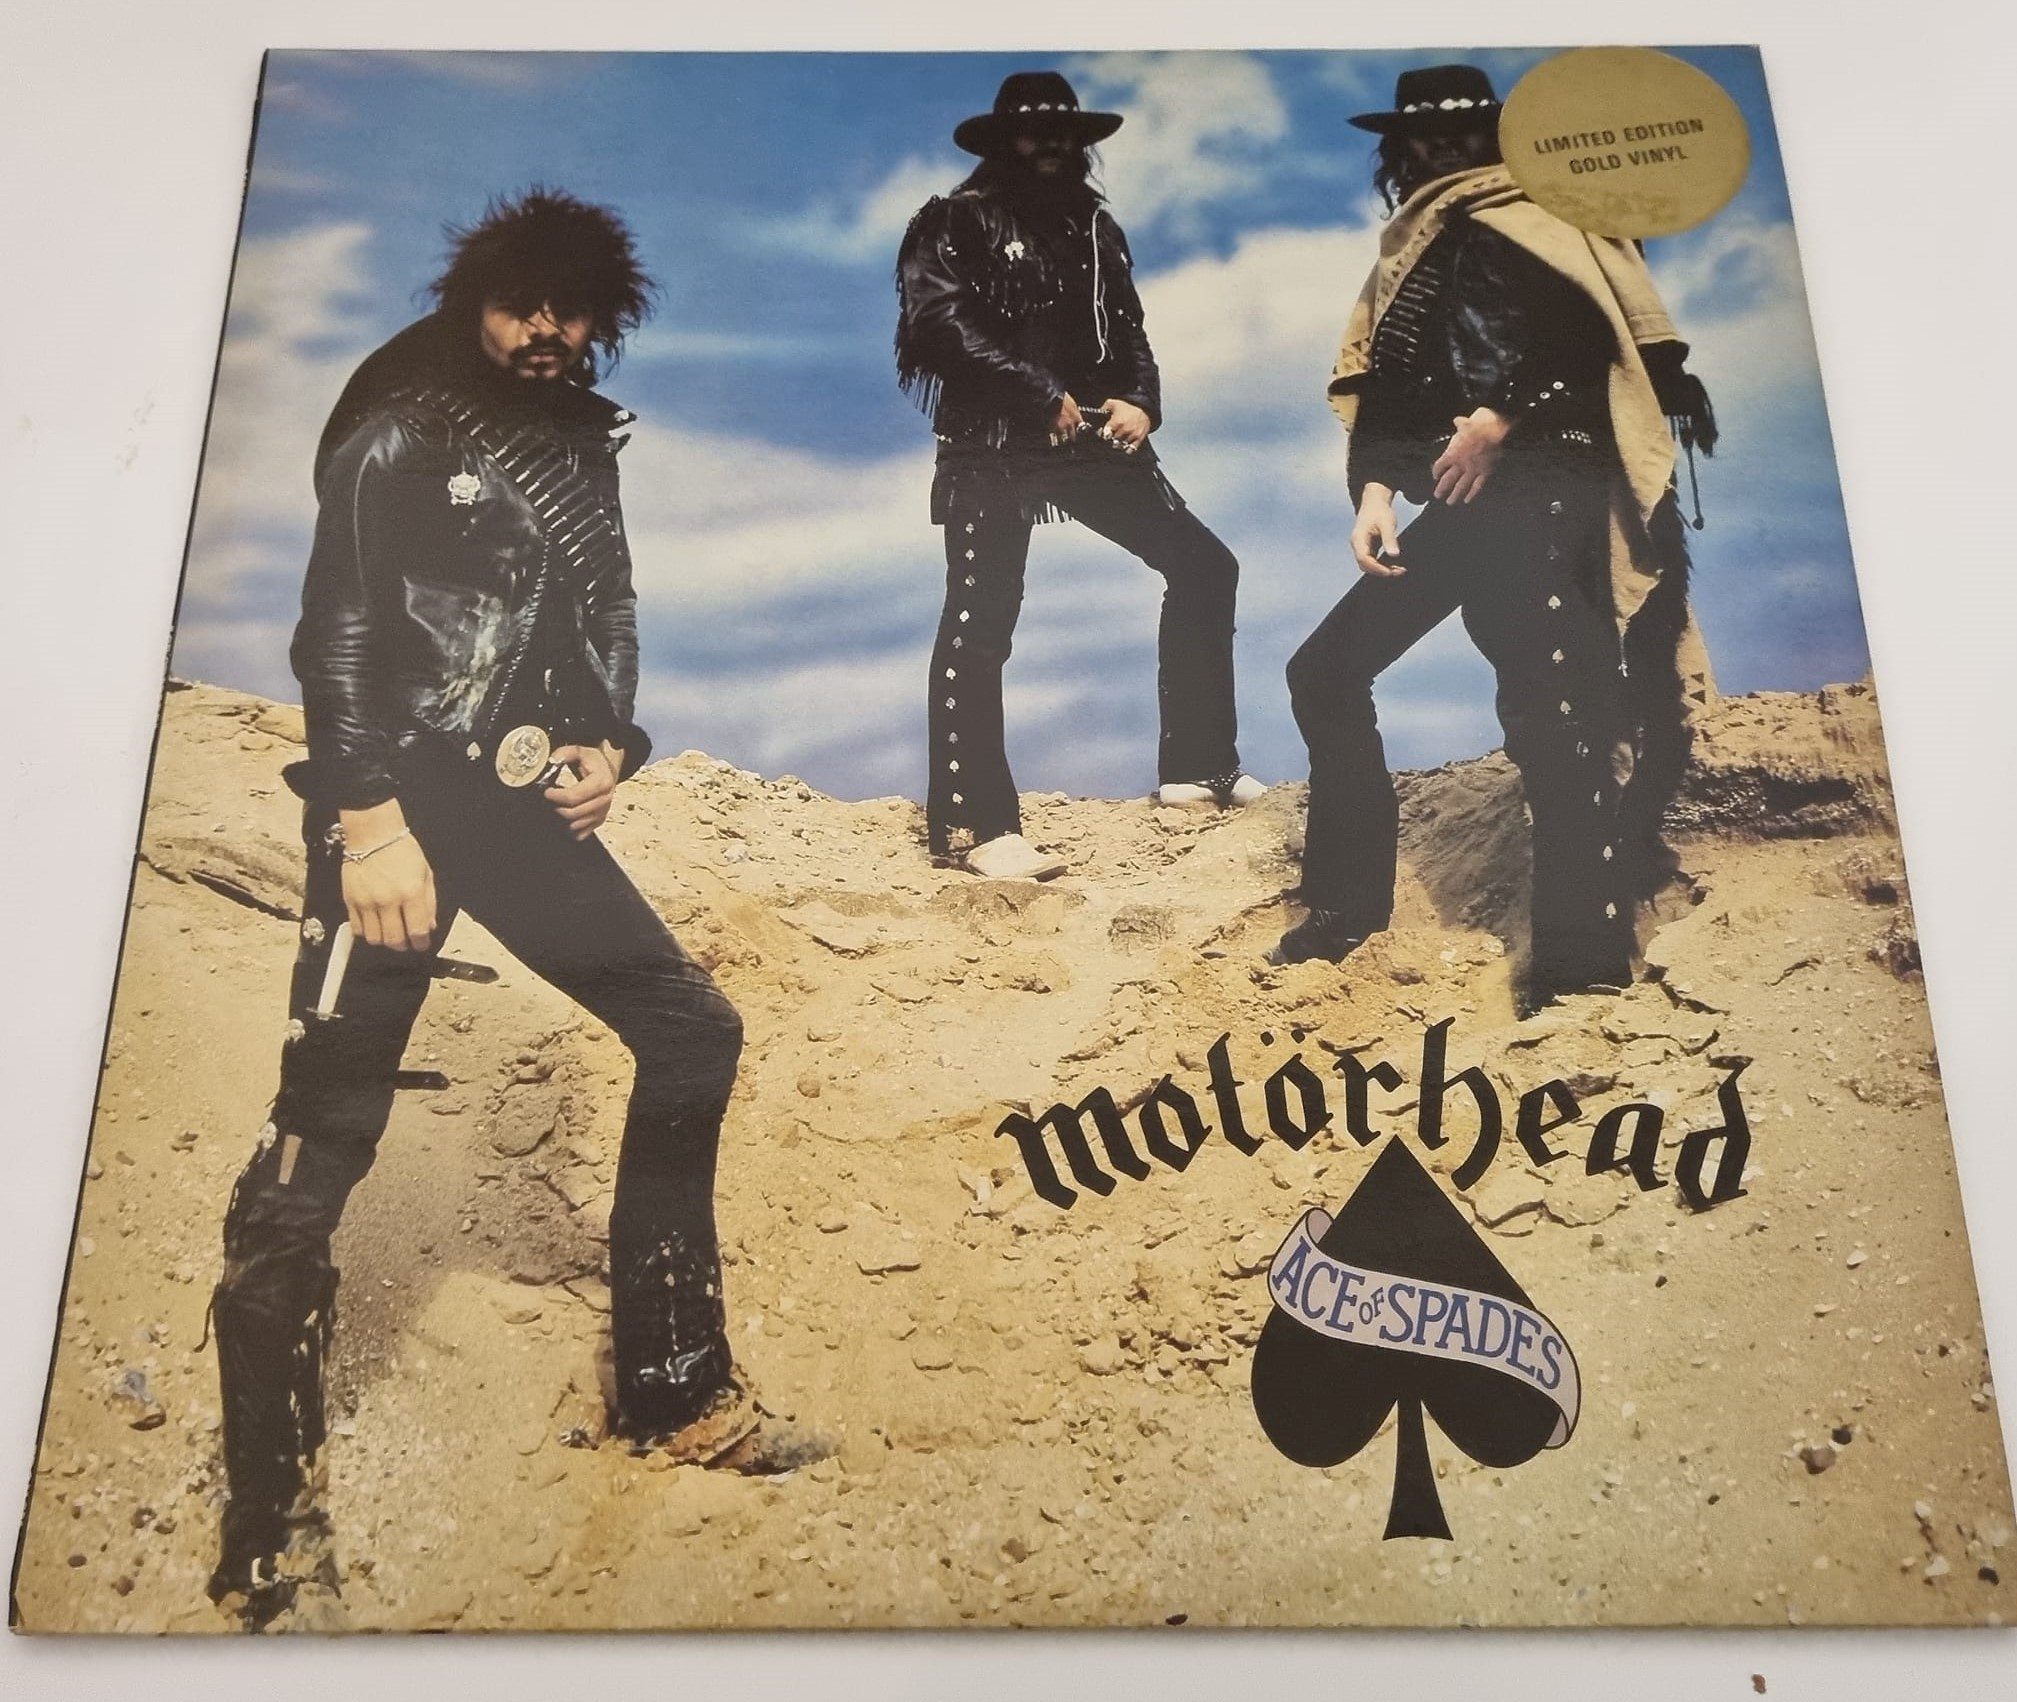 Buy this rare Motorhead record by clicking here